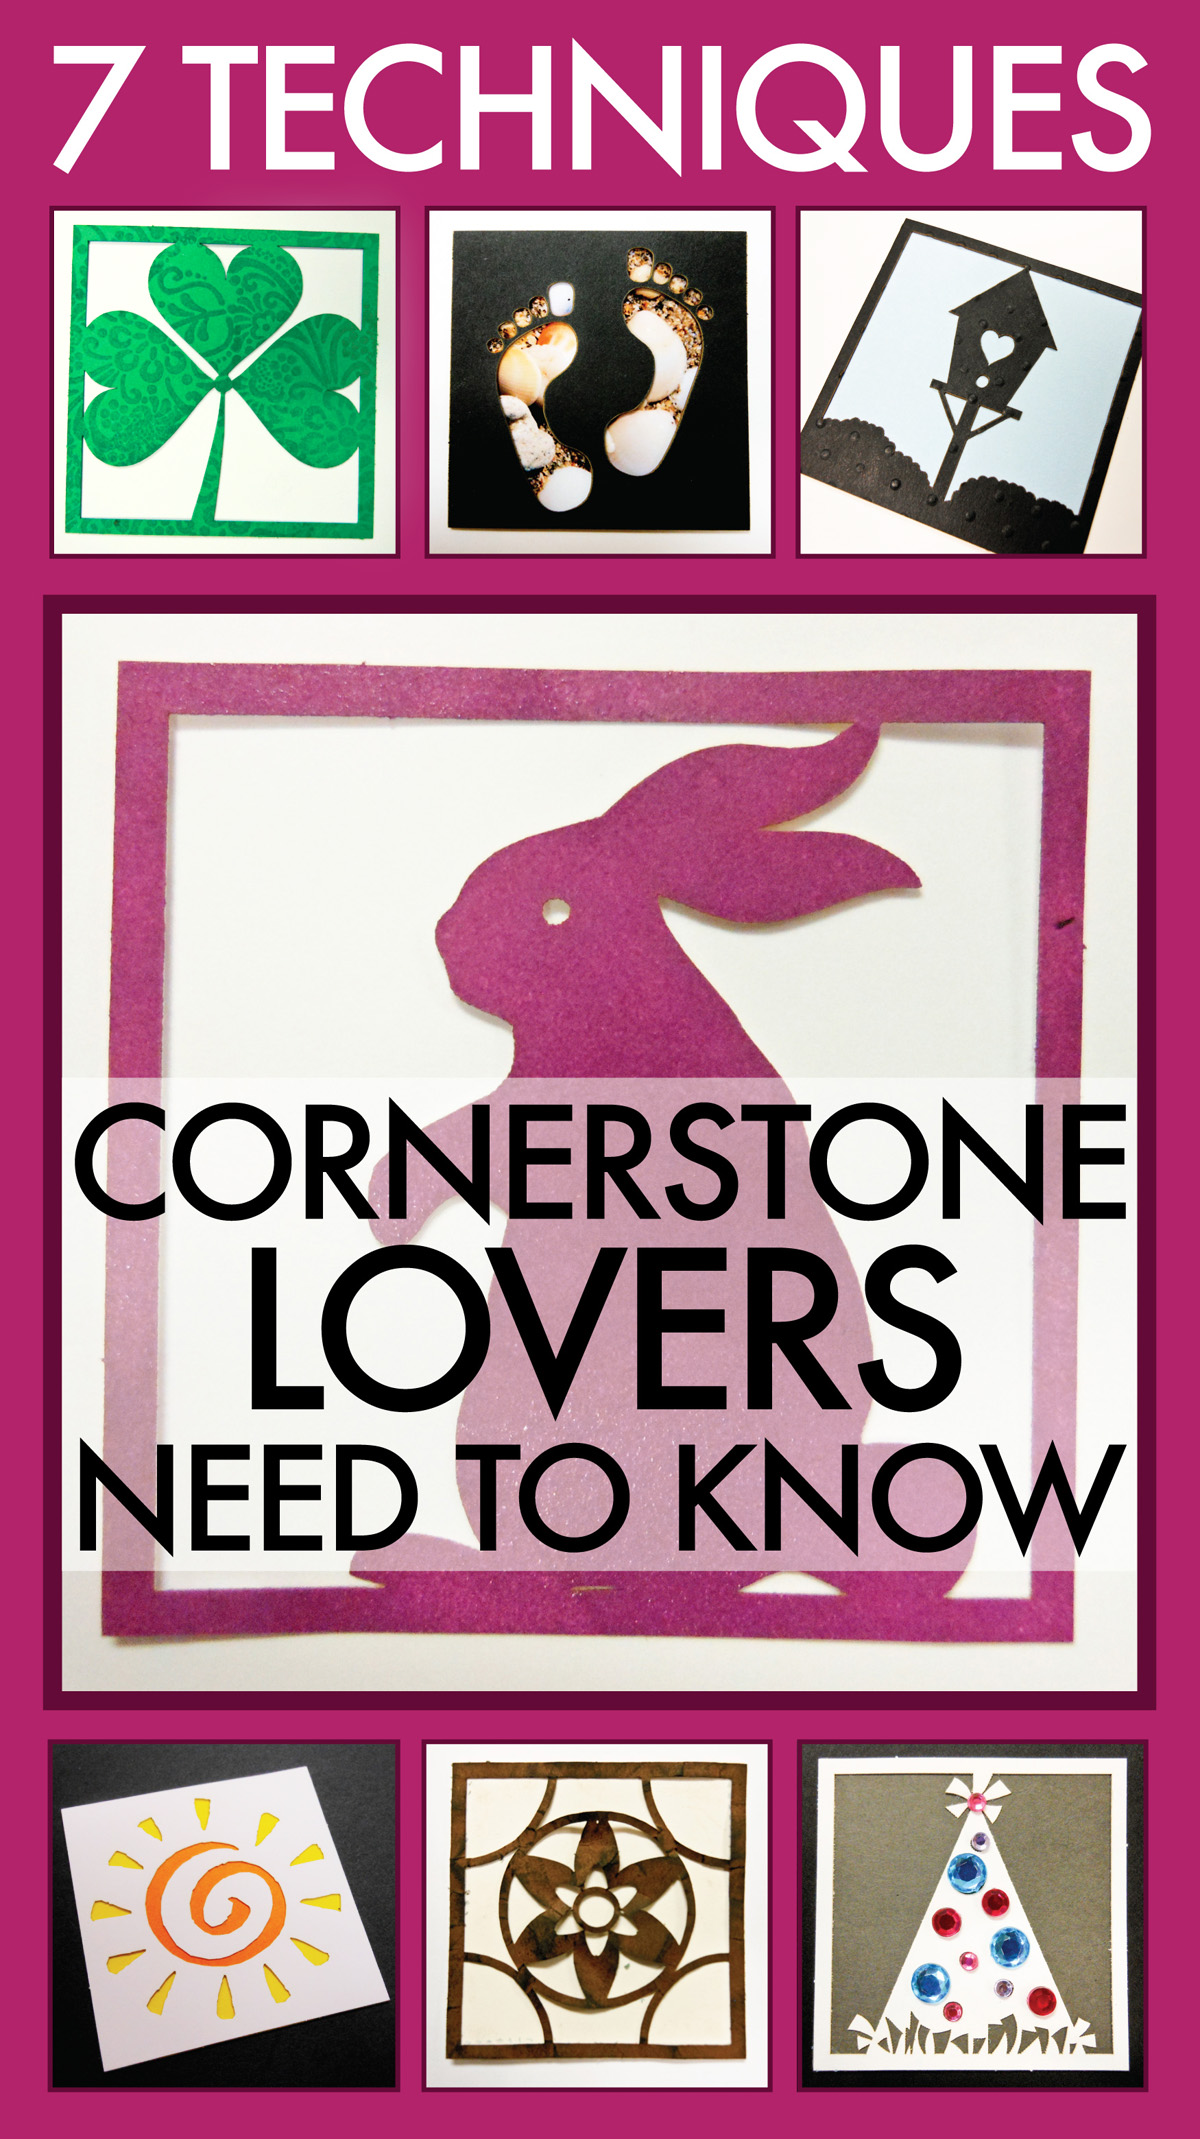 7 Techniques Cornerstone Lovers Need to Know